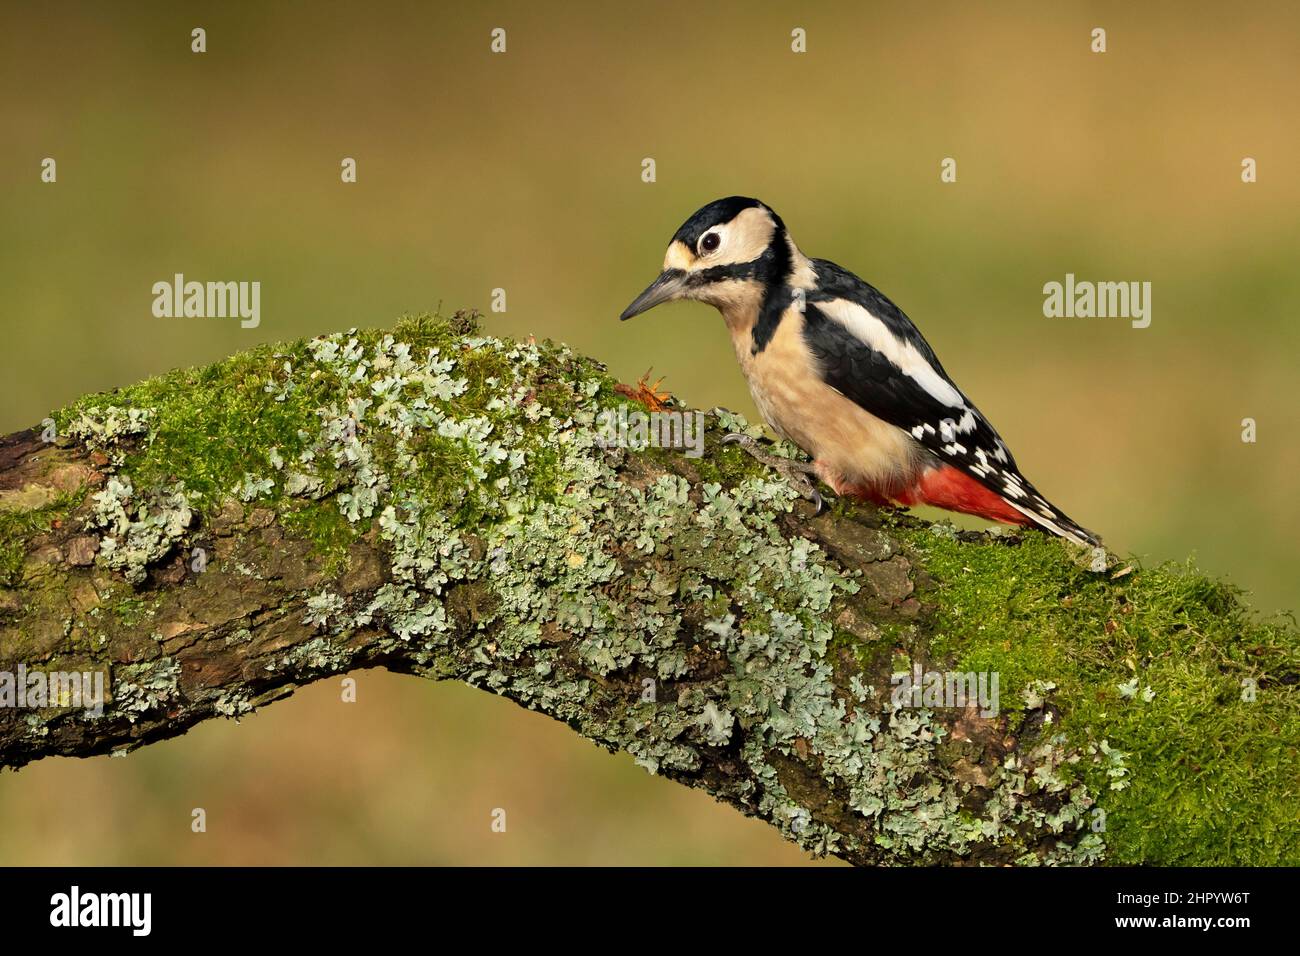 Great spotted woodpecker (Dendrocopos major) perched on a lichen covered oak tree, England Stock Photo